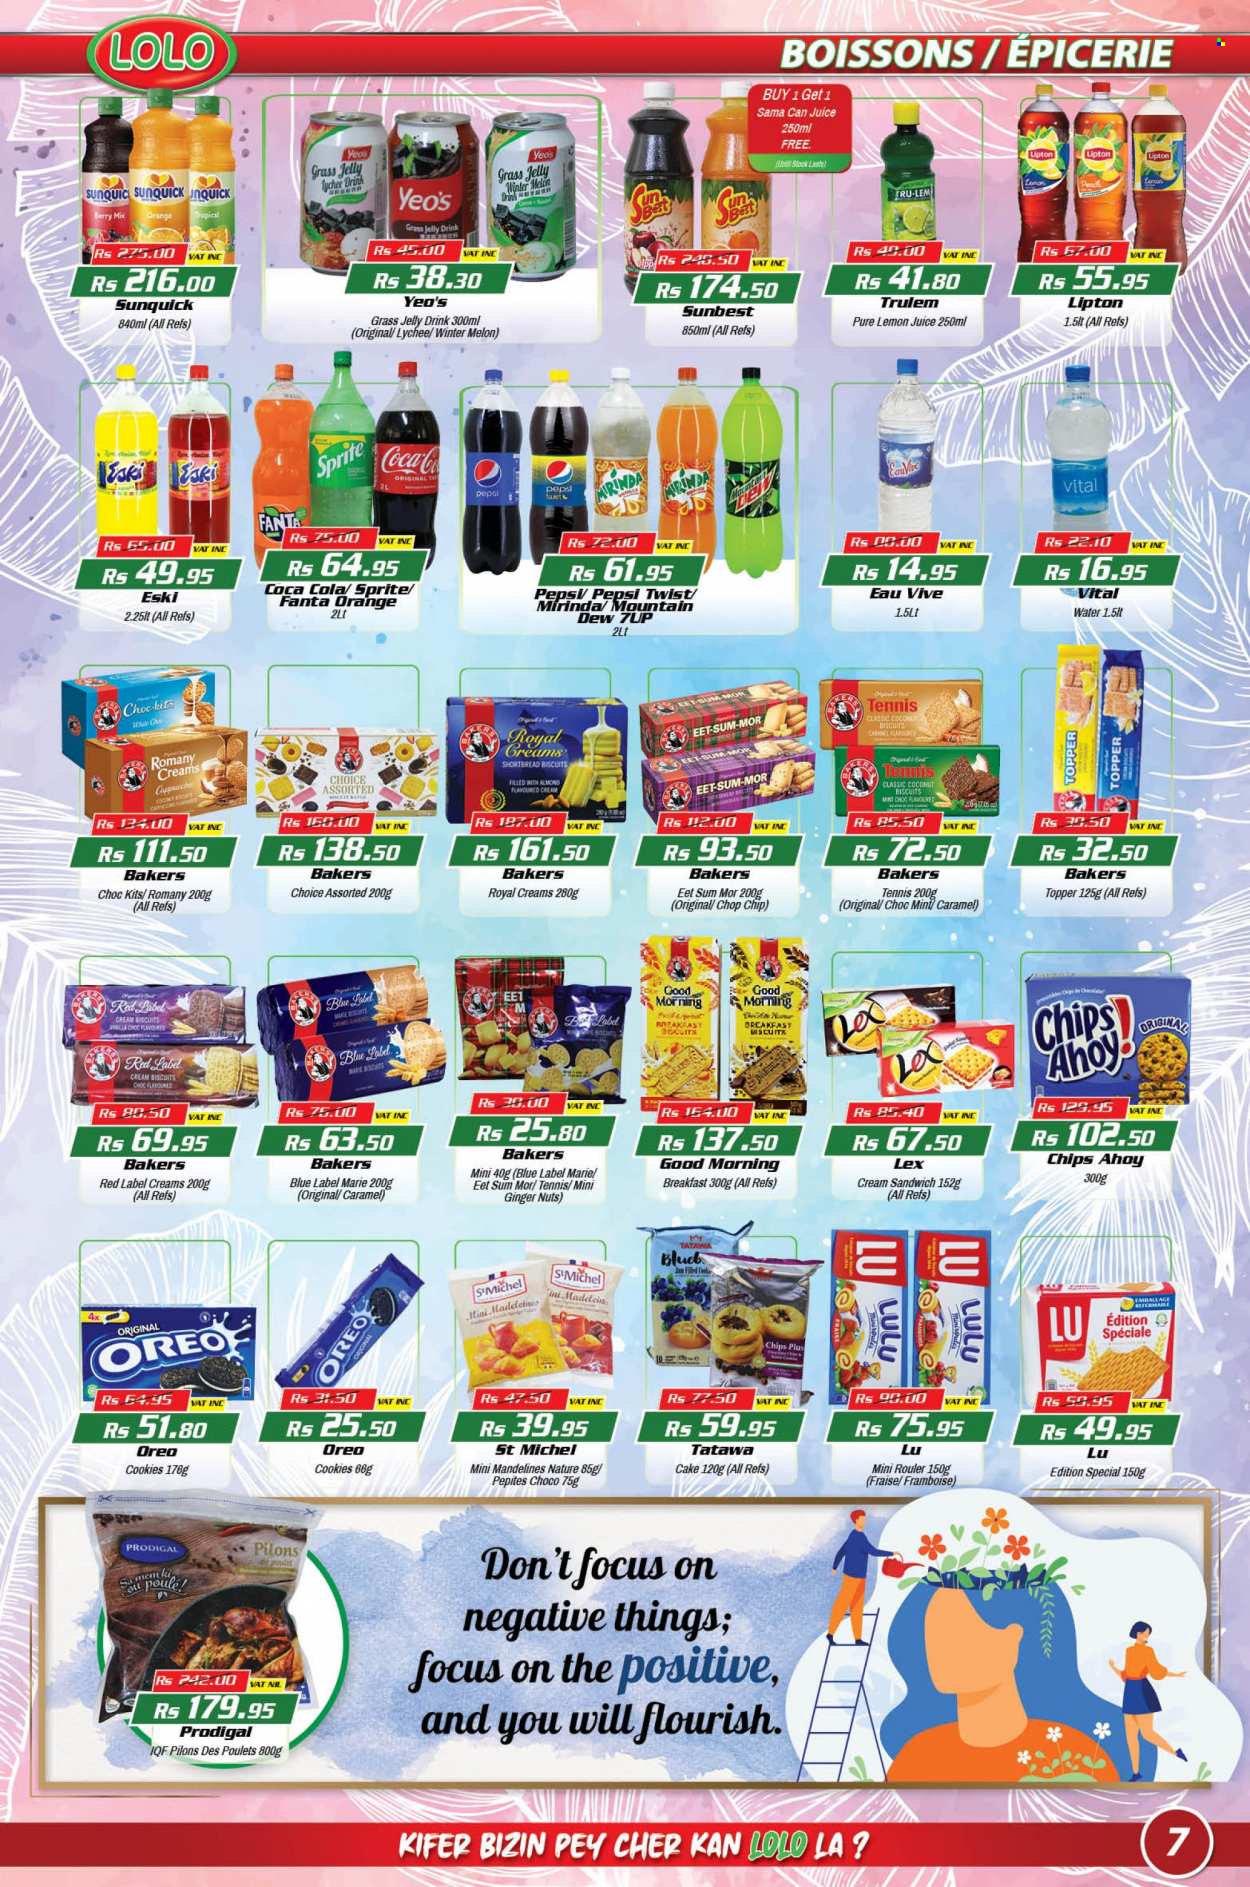 thumbnail - LOLO Hyper Catalogue - 26.09.2022 - 17.10.2022 - Sales products - cake, ginger, lychee, oranges, melons, cookies, jelly, biscuit, Chips Ahoy!, chips, caramel, Coca-Cola, Mountain Dew, Sprite, Pepsi, Fanta, 7UP, lemon juice, Bakers, Oreo, Lipton. Page 7.